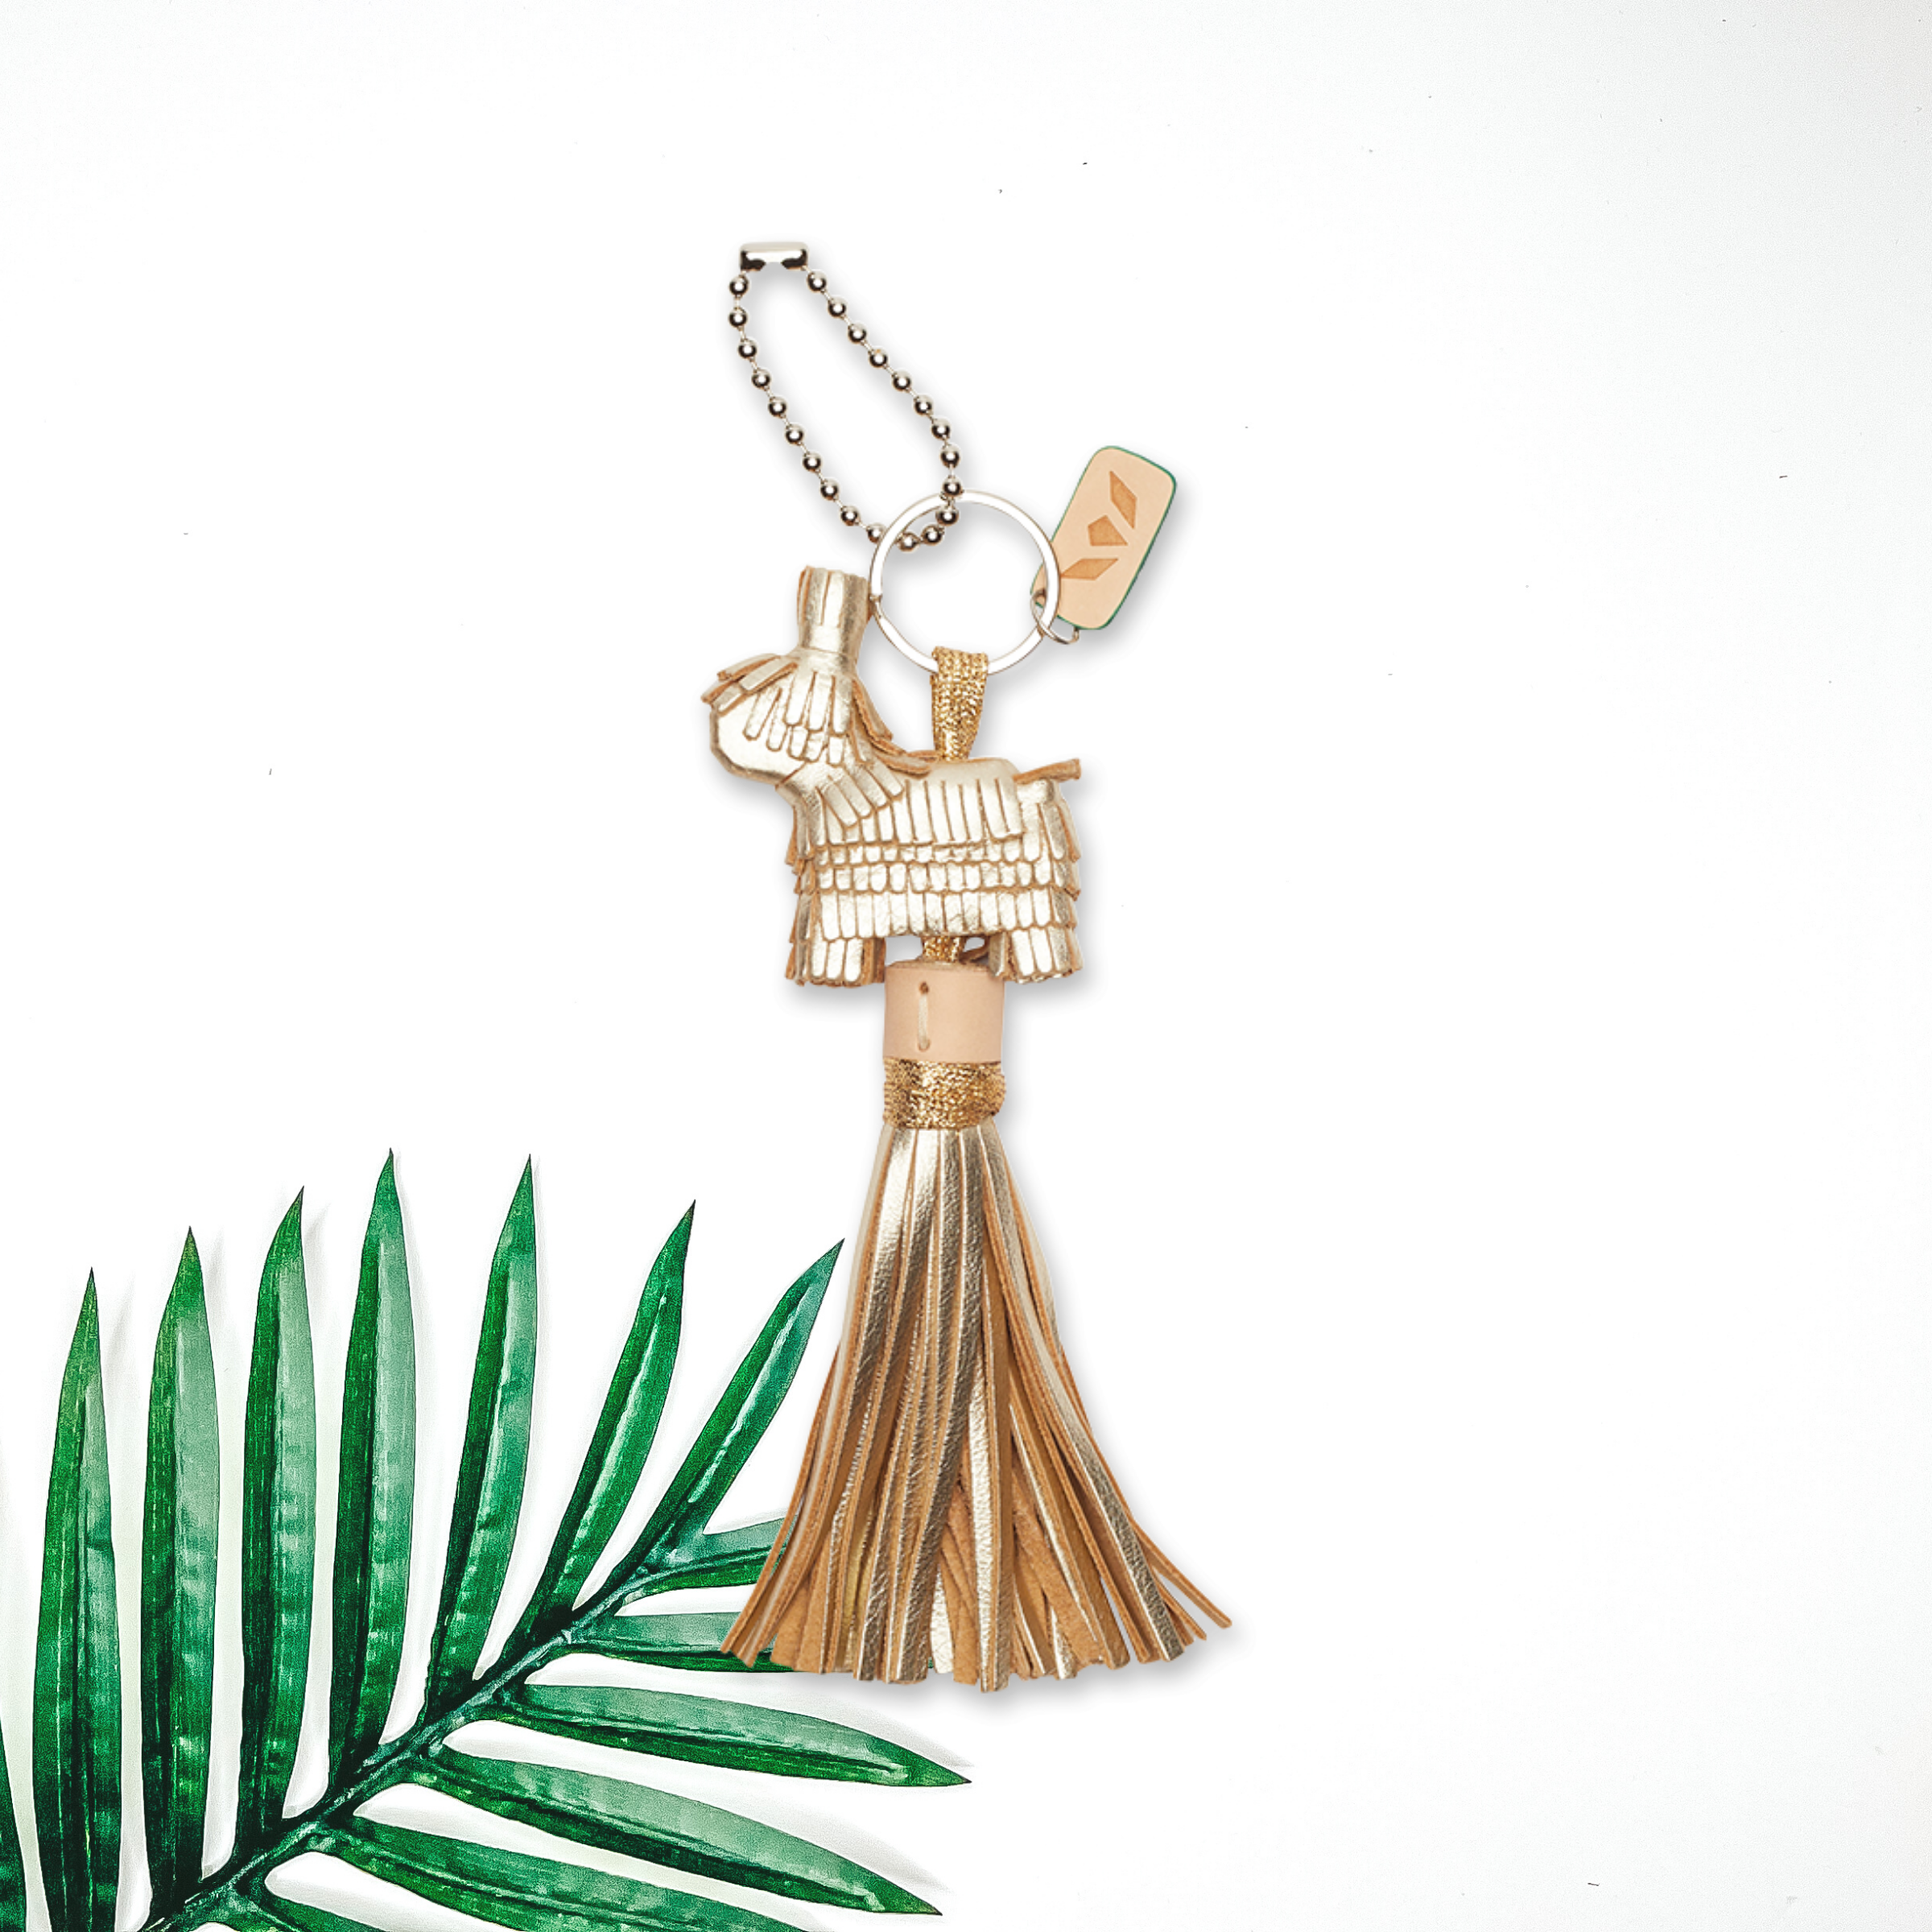 Centered in the middle of the picture is a gold donkey charm with gold tassels. To the right of the charm is a palm leaf, all on a white background. 